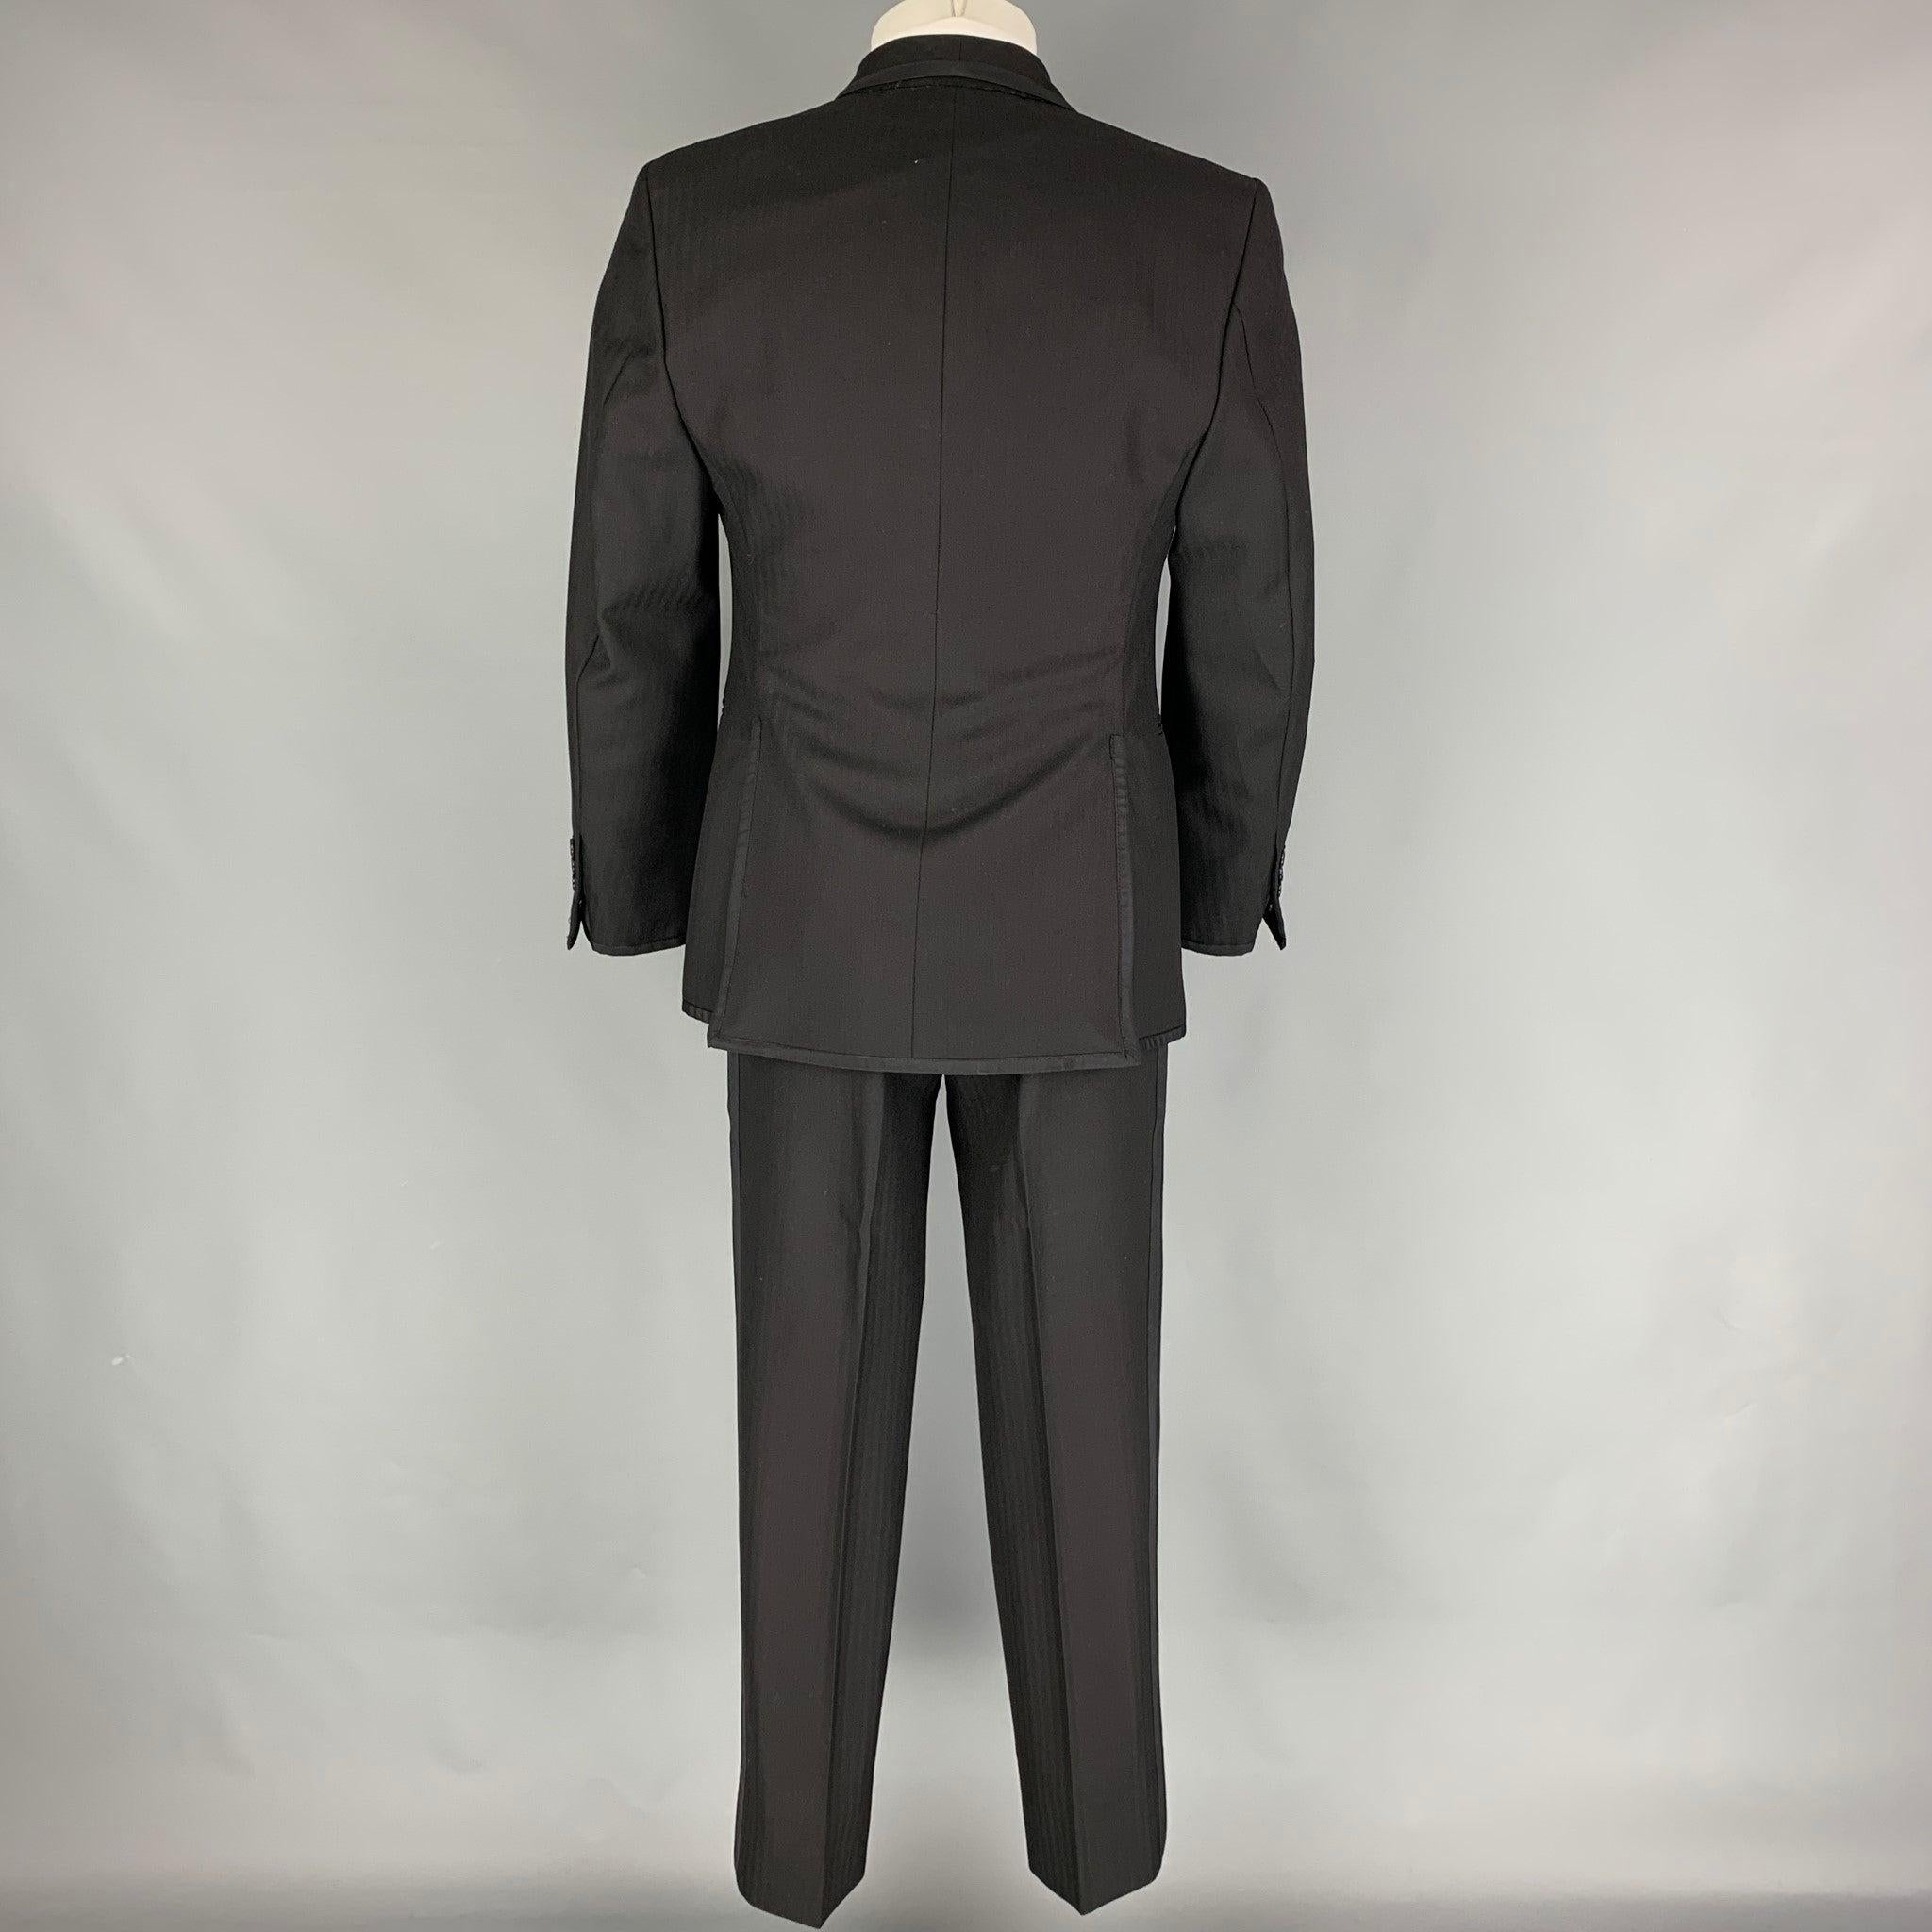 THOM BROWNE for NEIMAN MARCUS Size S Black on Black Herringbone Tuxedo Suit In Excellent Condition For Sale In San Francisco, CA